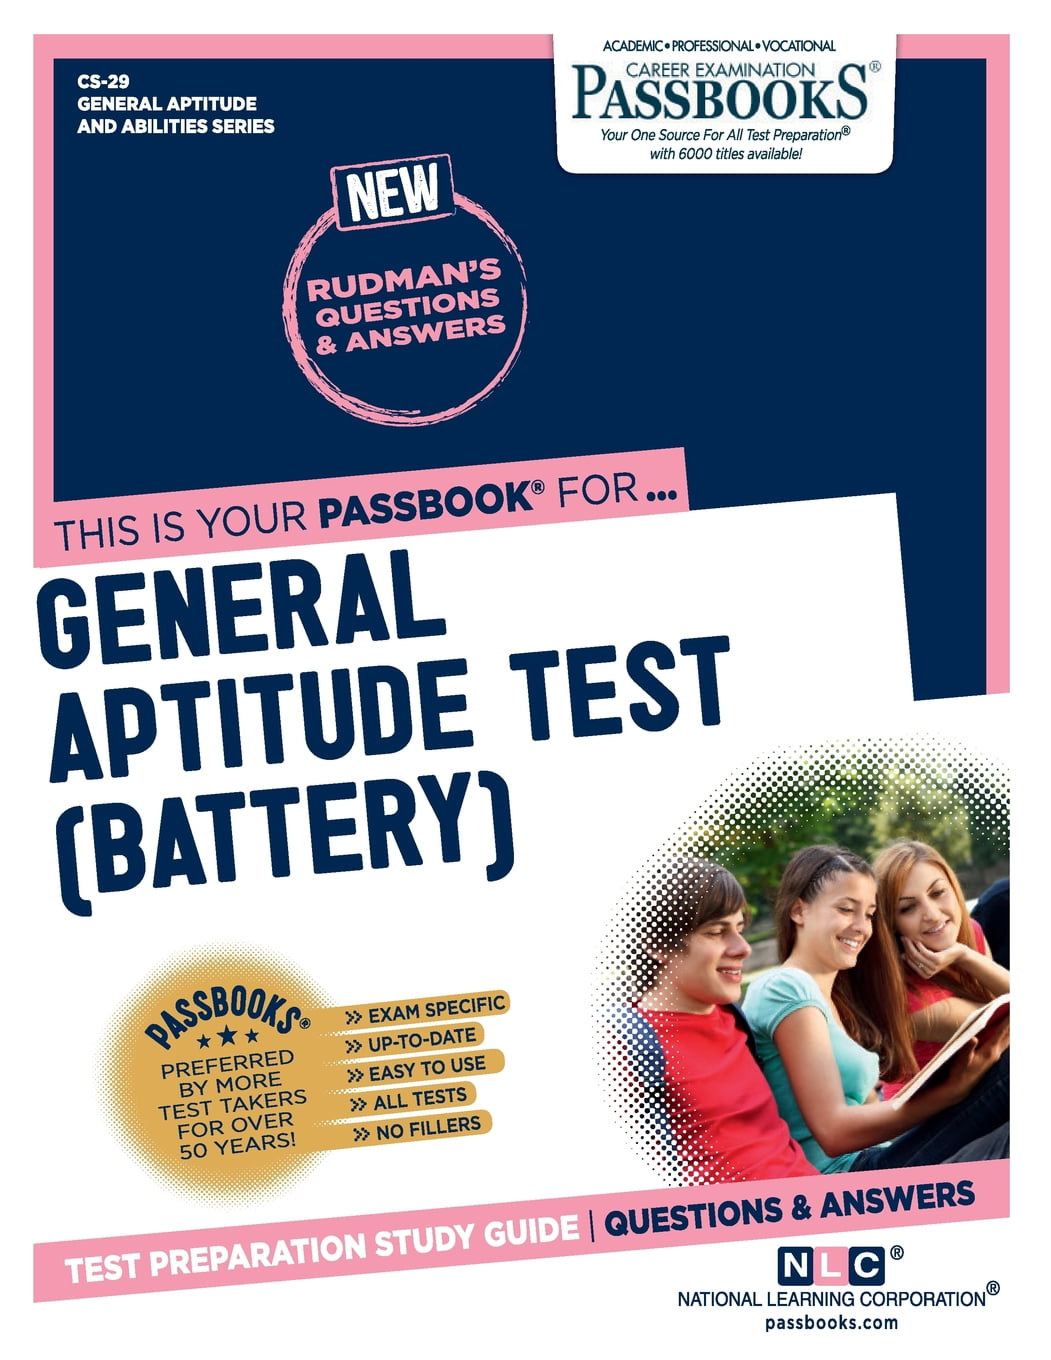 The General Aptitude Test Battery